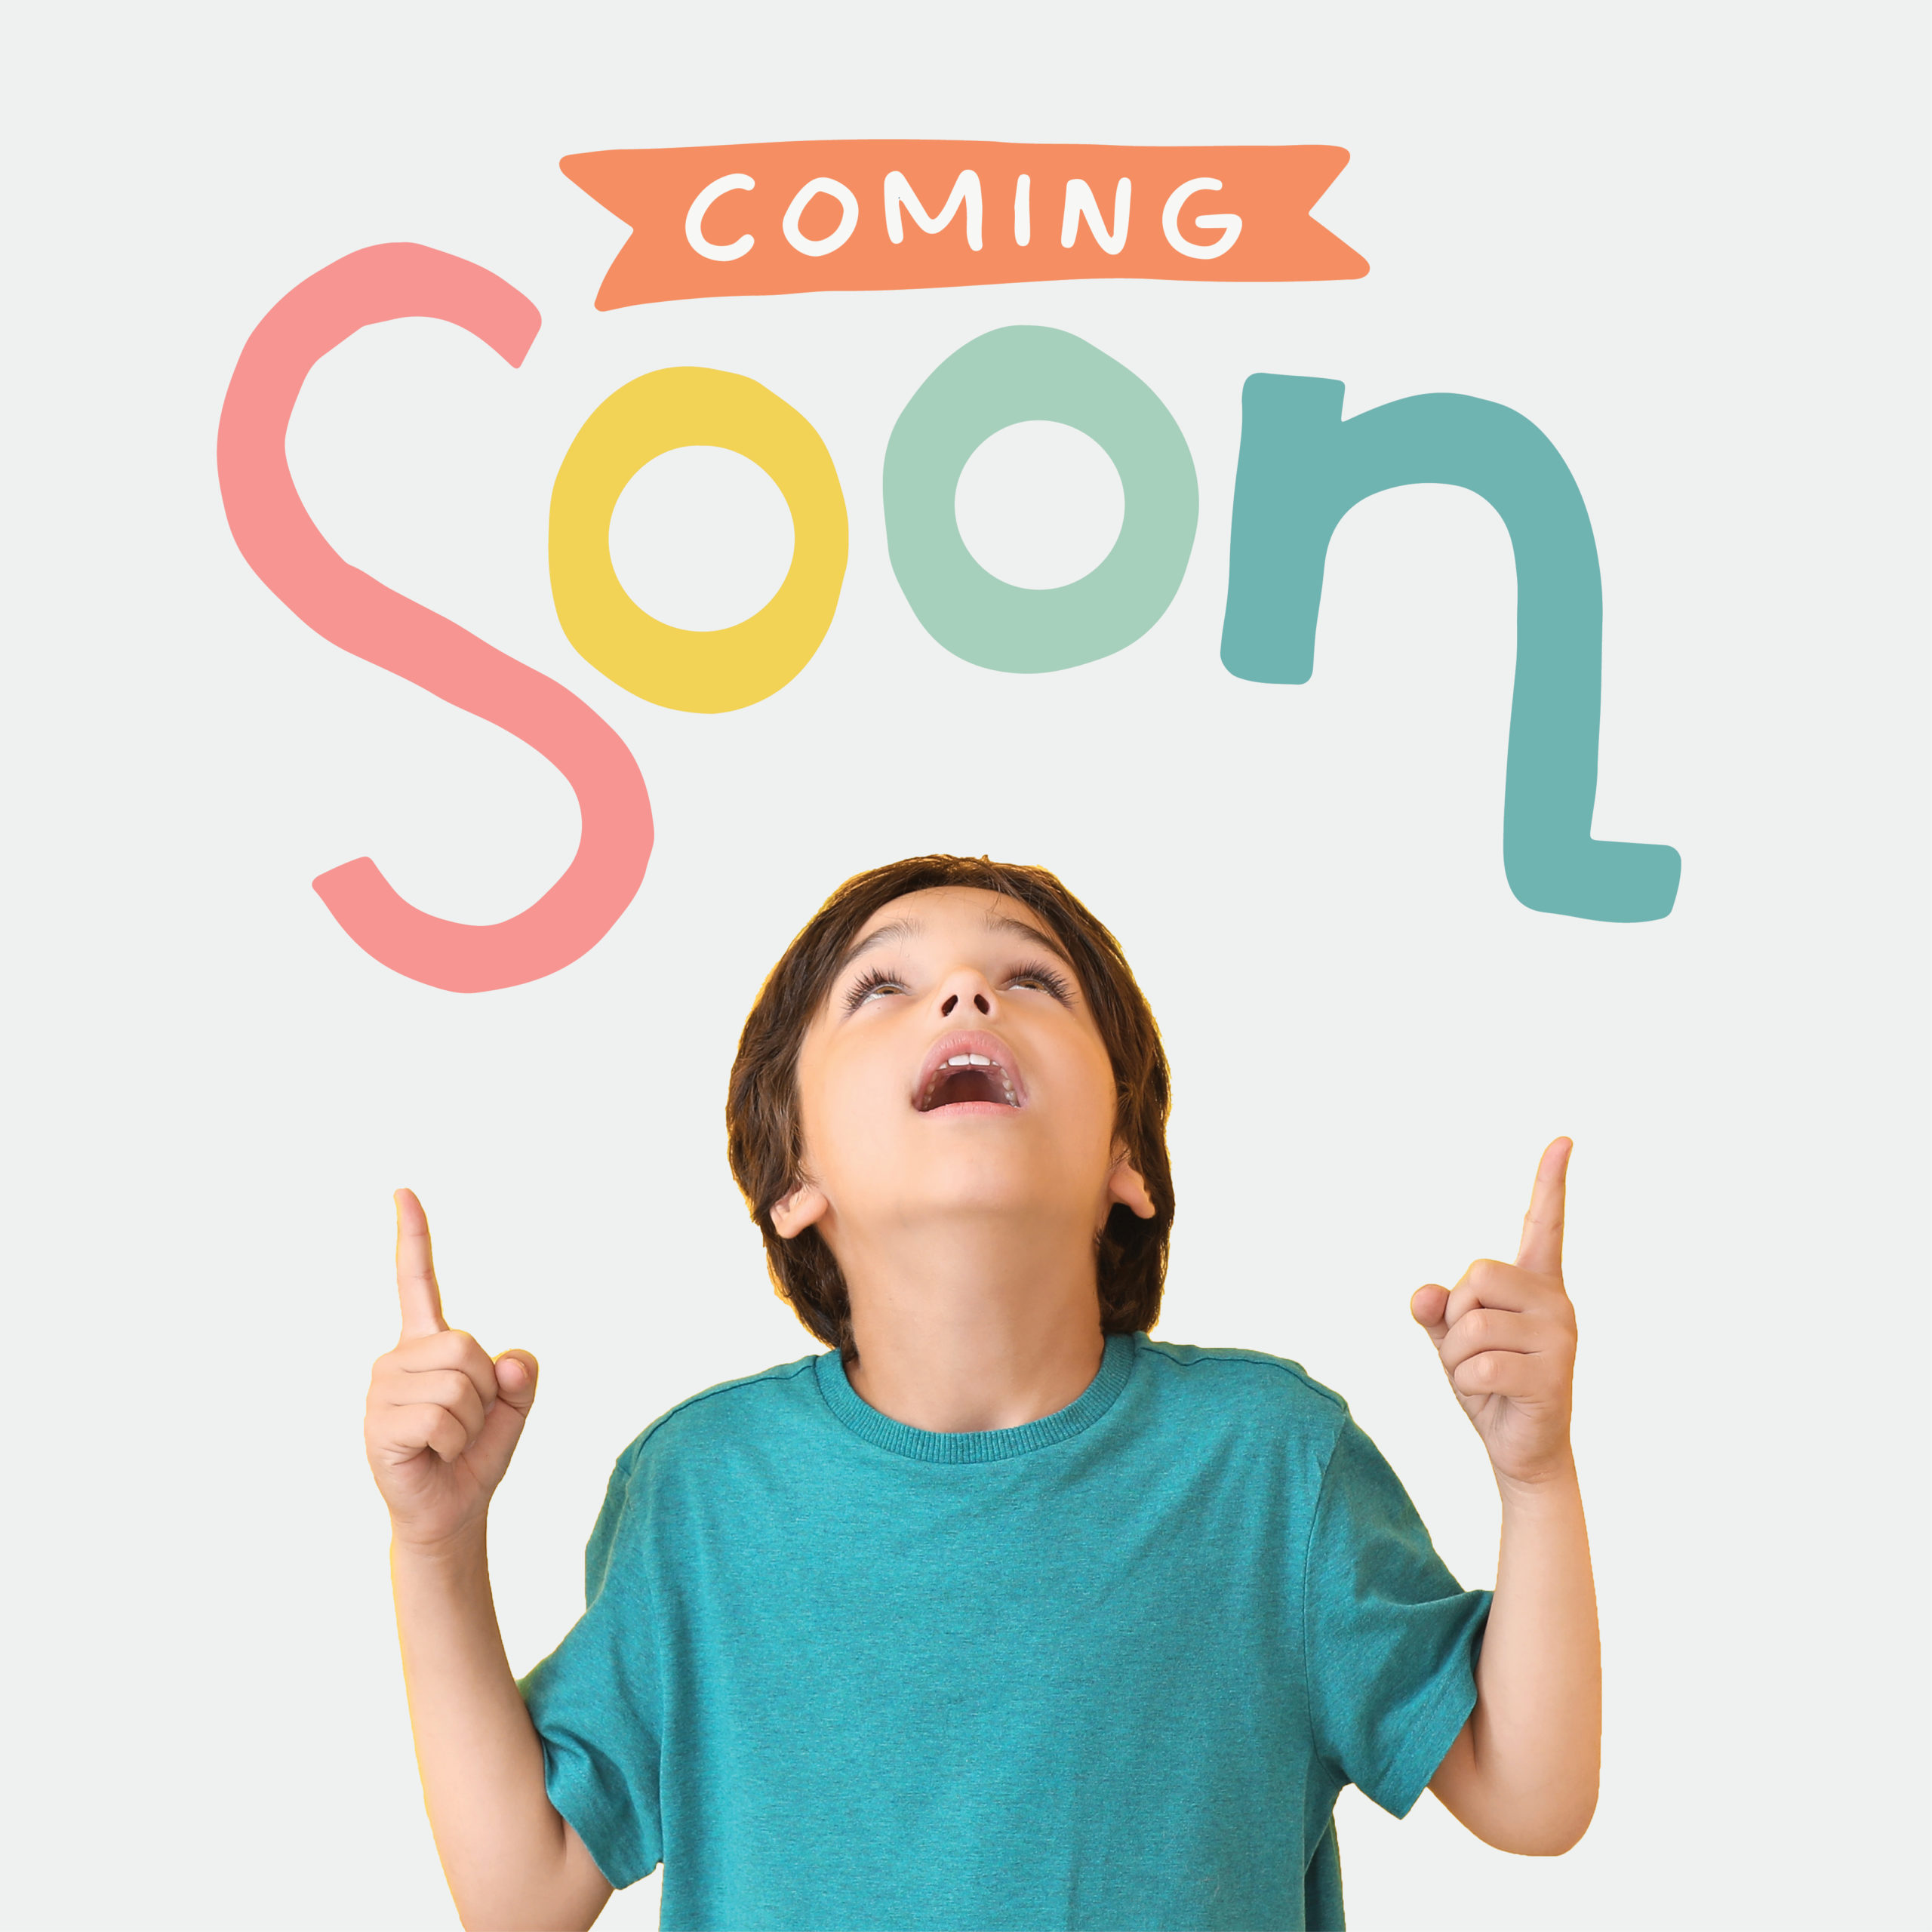 Kid to Kid location is coming soon